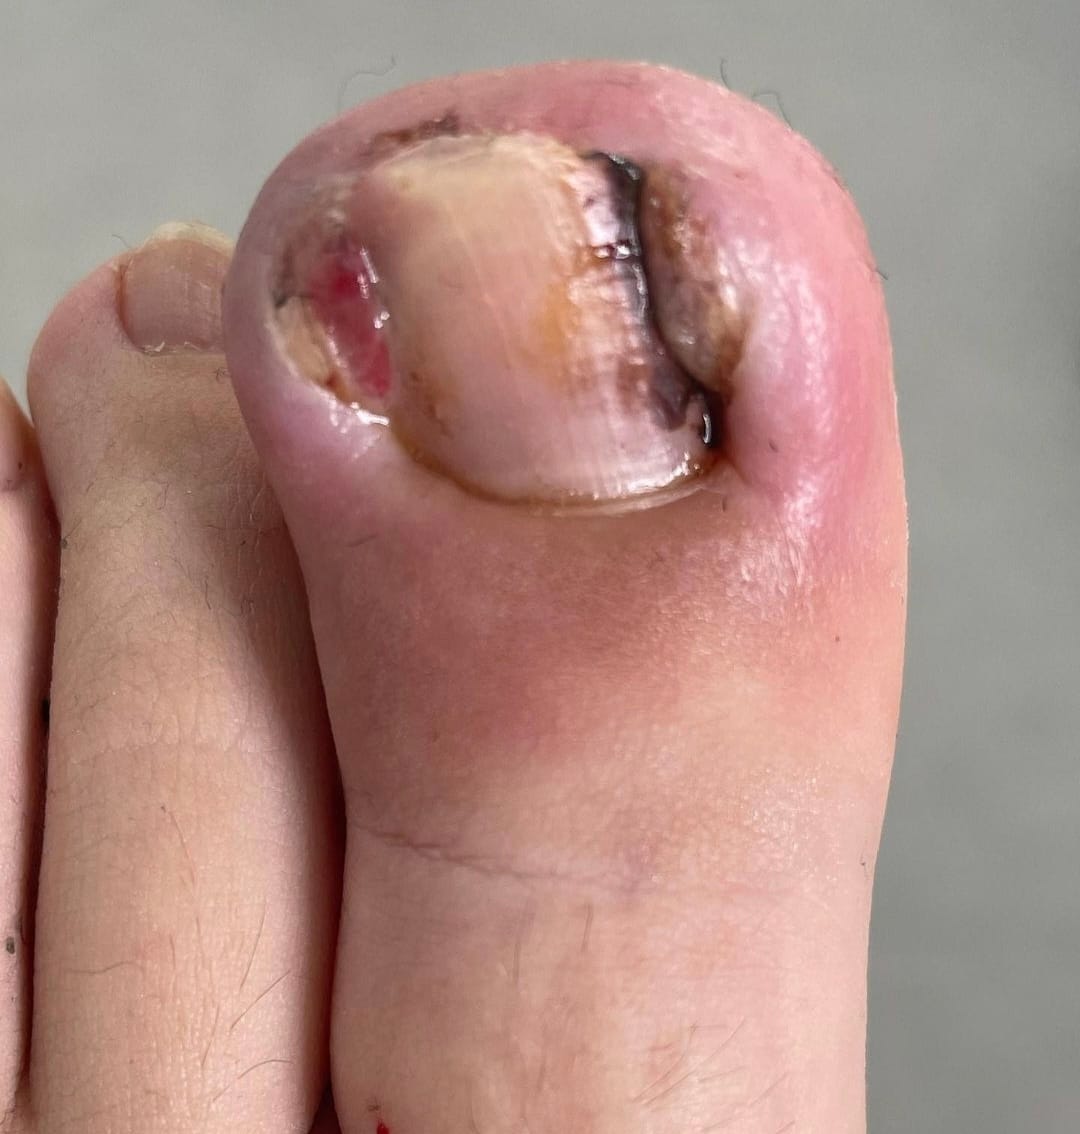 When should I see a podiatrist about my ingrown toenail? - Active Care  Podiatry